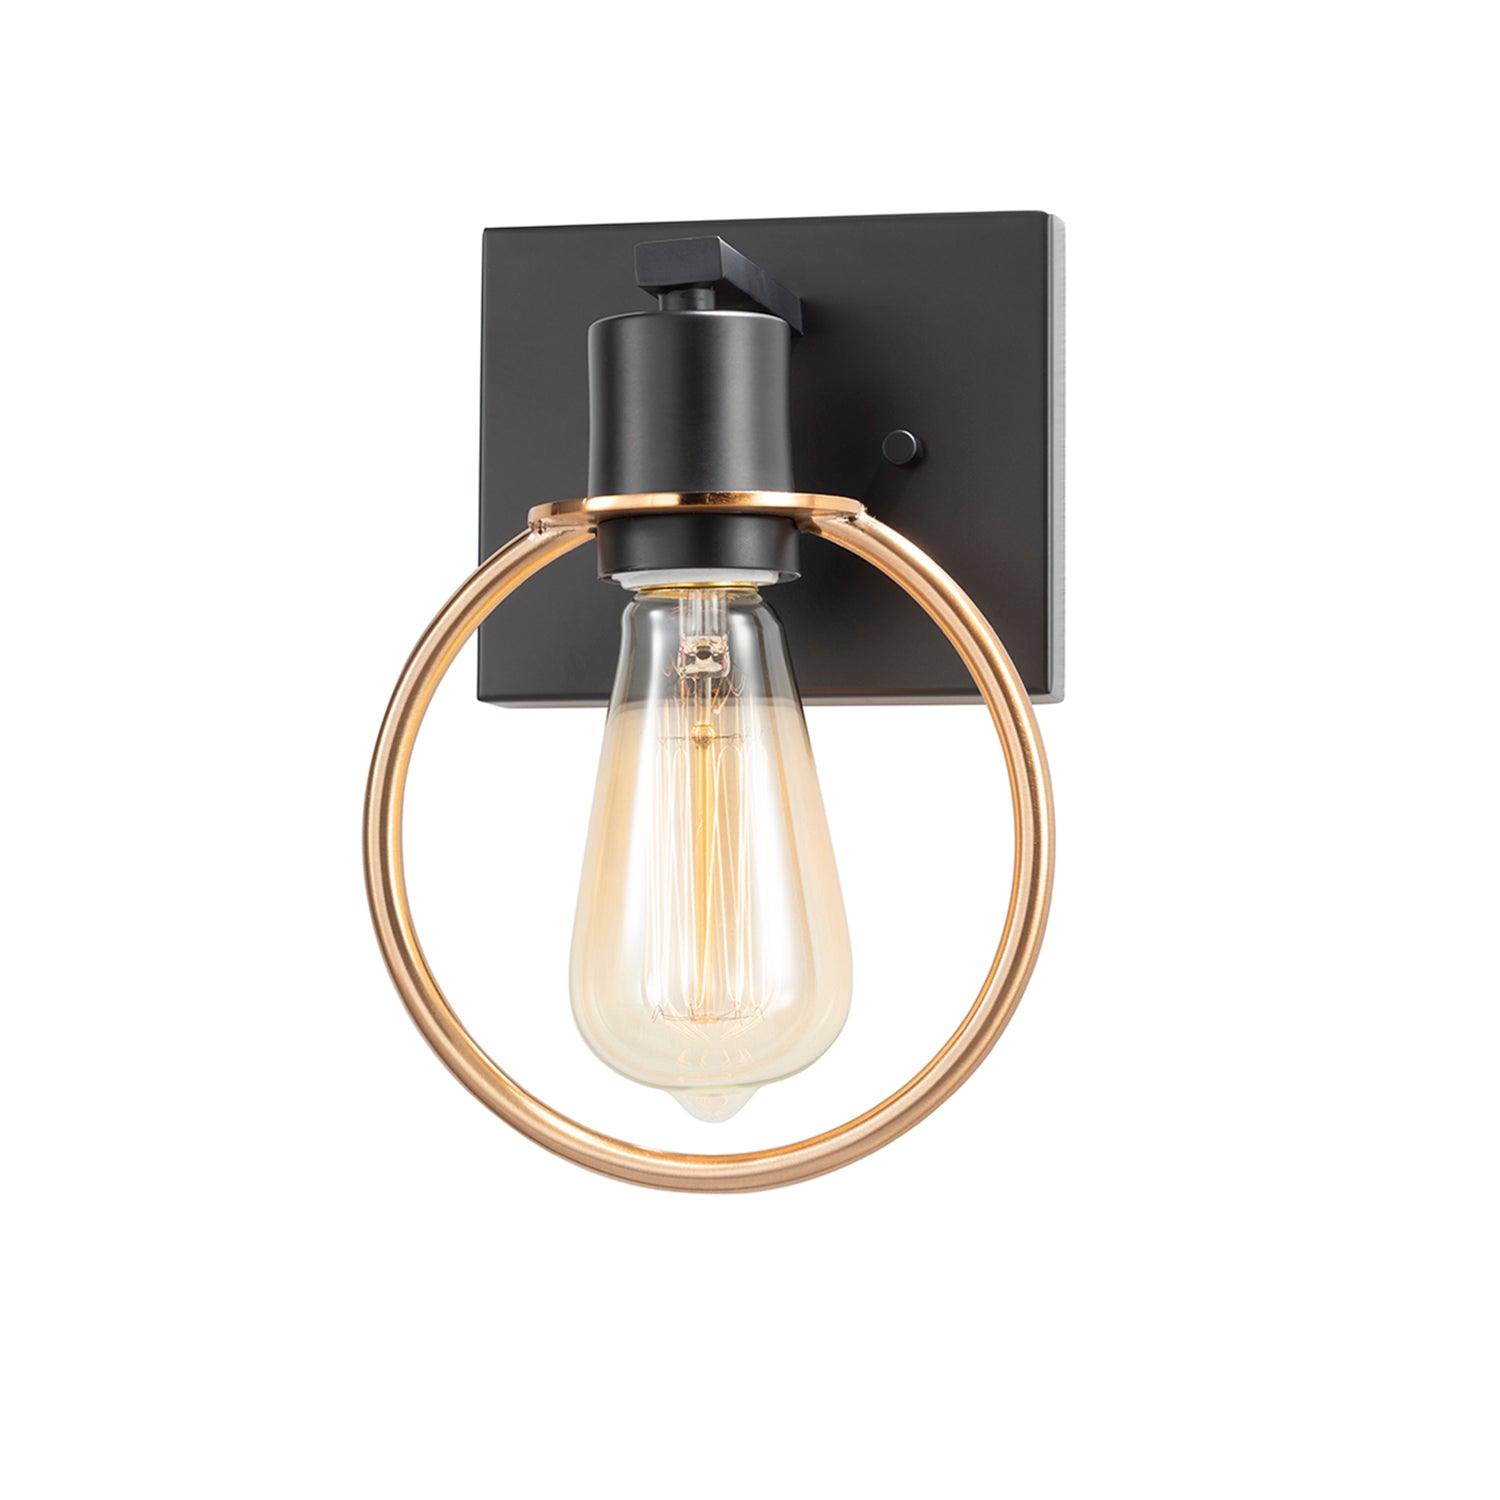 Justice Designs - Volta Wall Sconce - NSH-8901-MBBR | Montreal Lighting & Hardware